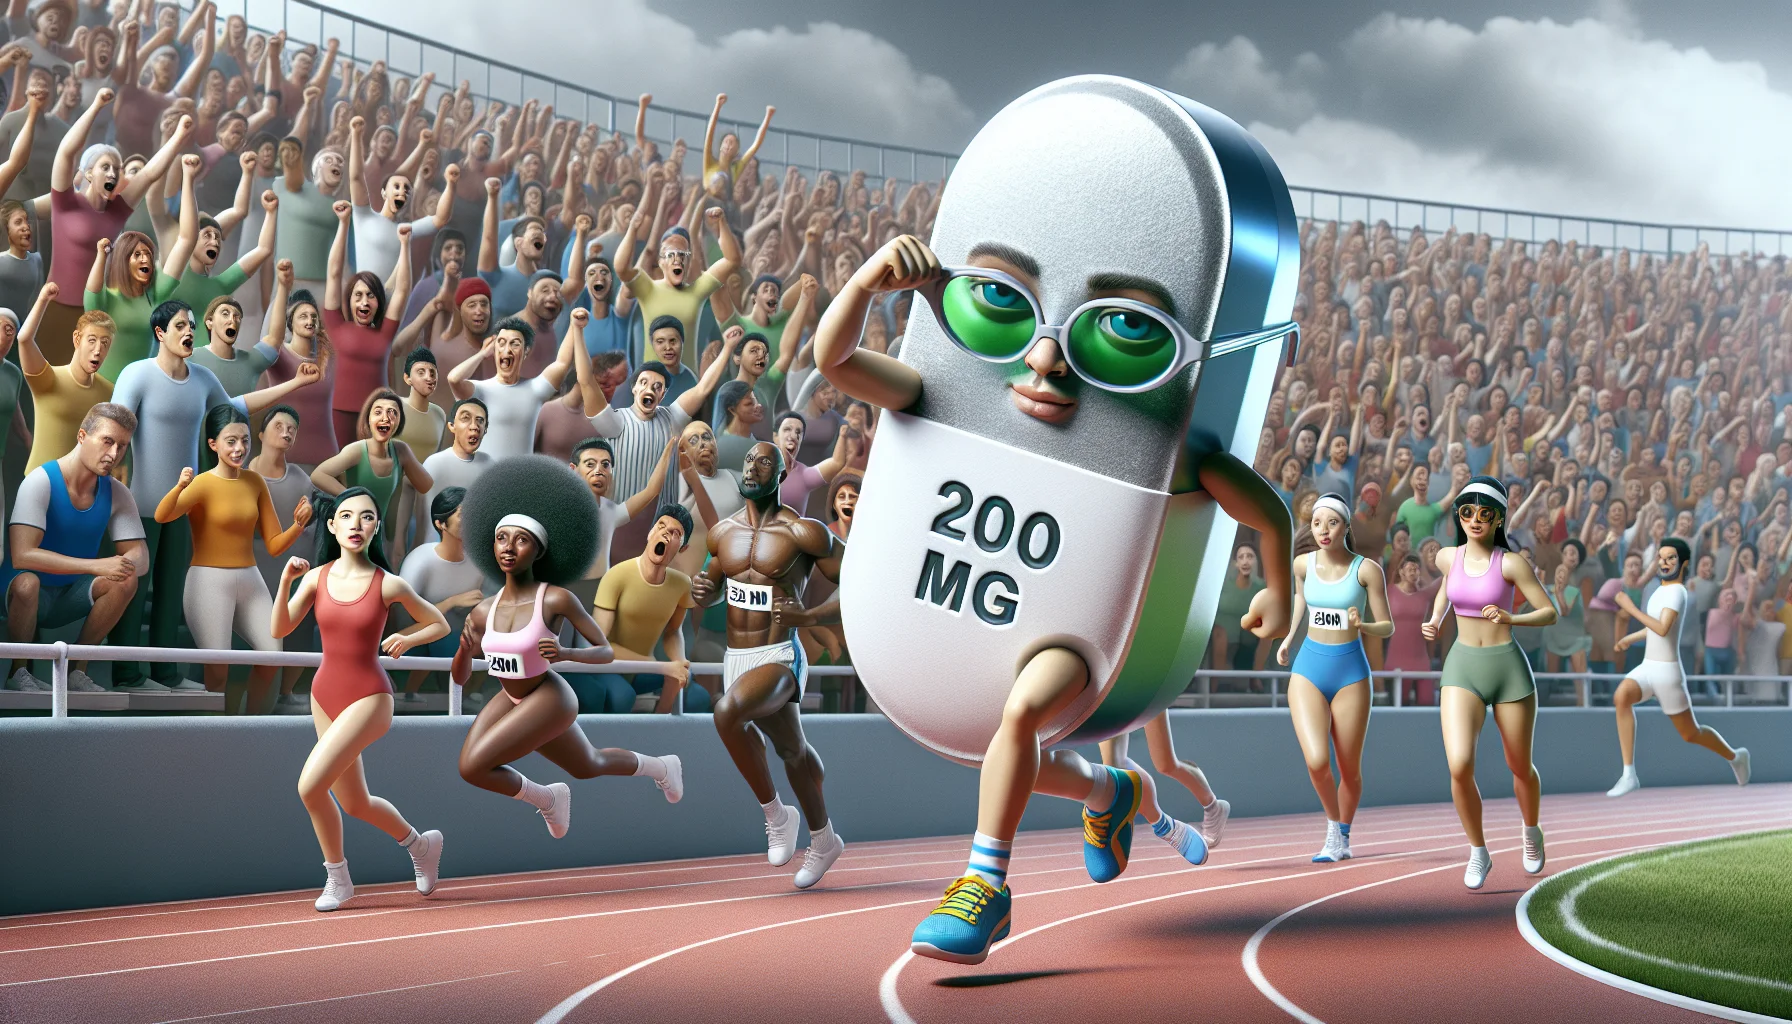 A whimsical representation of a magnesium supplement pill, labelled as 200 mg, animated with sporty sunglasses and sneakers, as if it's energetically sprinting on the track of a stadium, surrounded by cheering multitudes. An onlooking crowd of diverse people, including a South Asian female gymnast, a Black male soccer player, and a Middle-Eastern female tennis player each look in awe, clearly intrigued by the supplement's vitality. The scene is filled with vibrant colors and communicates a healthy lifestyle adopting supplements especially for individuals into sports.